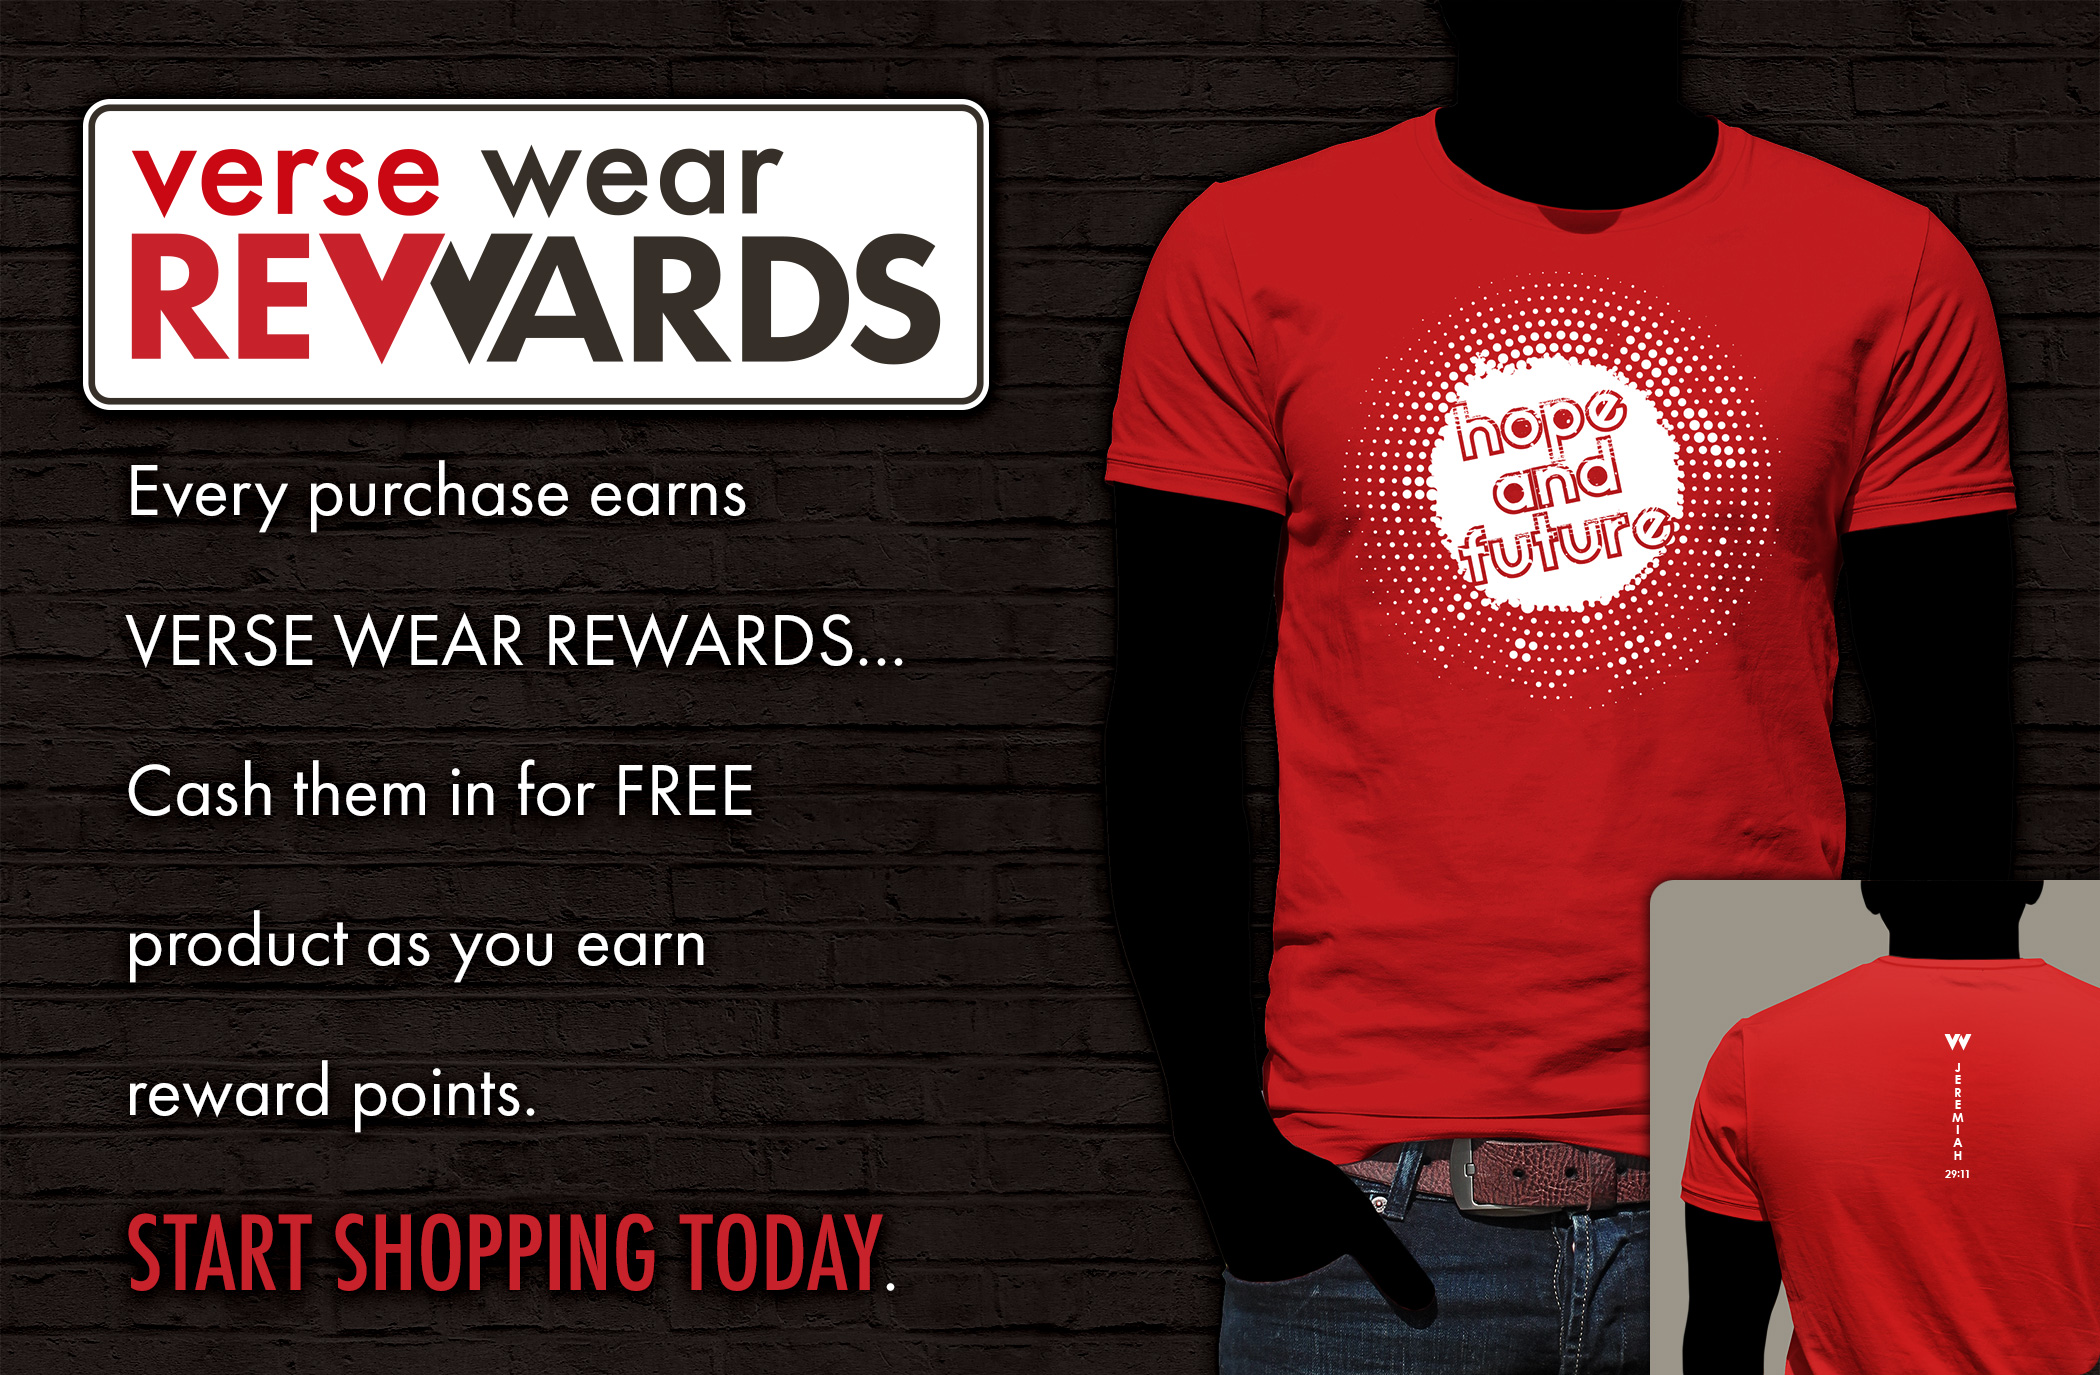 Every purchase earns VERSE WEAR REWARDS... Cash them in for FREE product as you earn 
reward points. START SHOPPING TODAY.